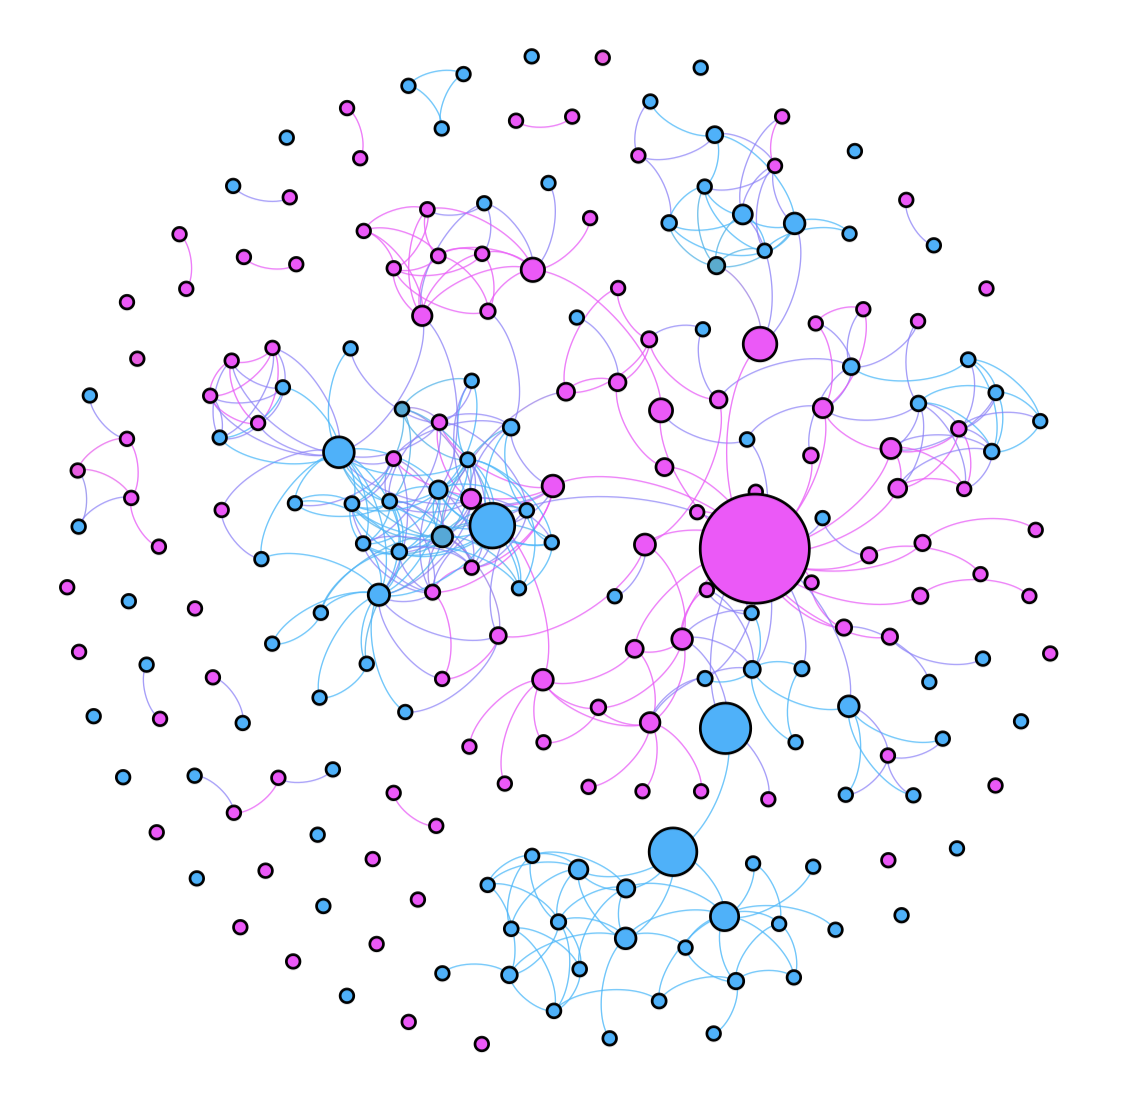 Complex-Network/Complex_Network_Analysis/社会网络简单理解.md at master ·  LiuChuang0059/Complex-Network · GitHub